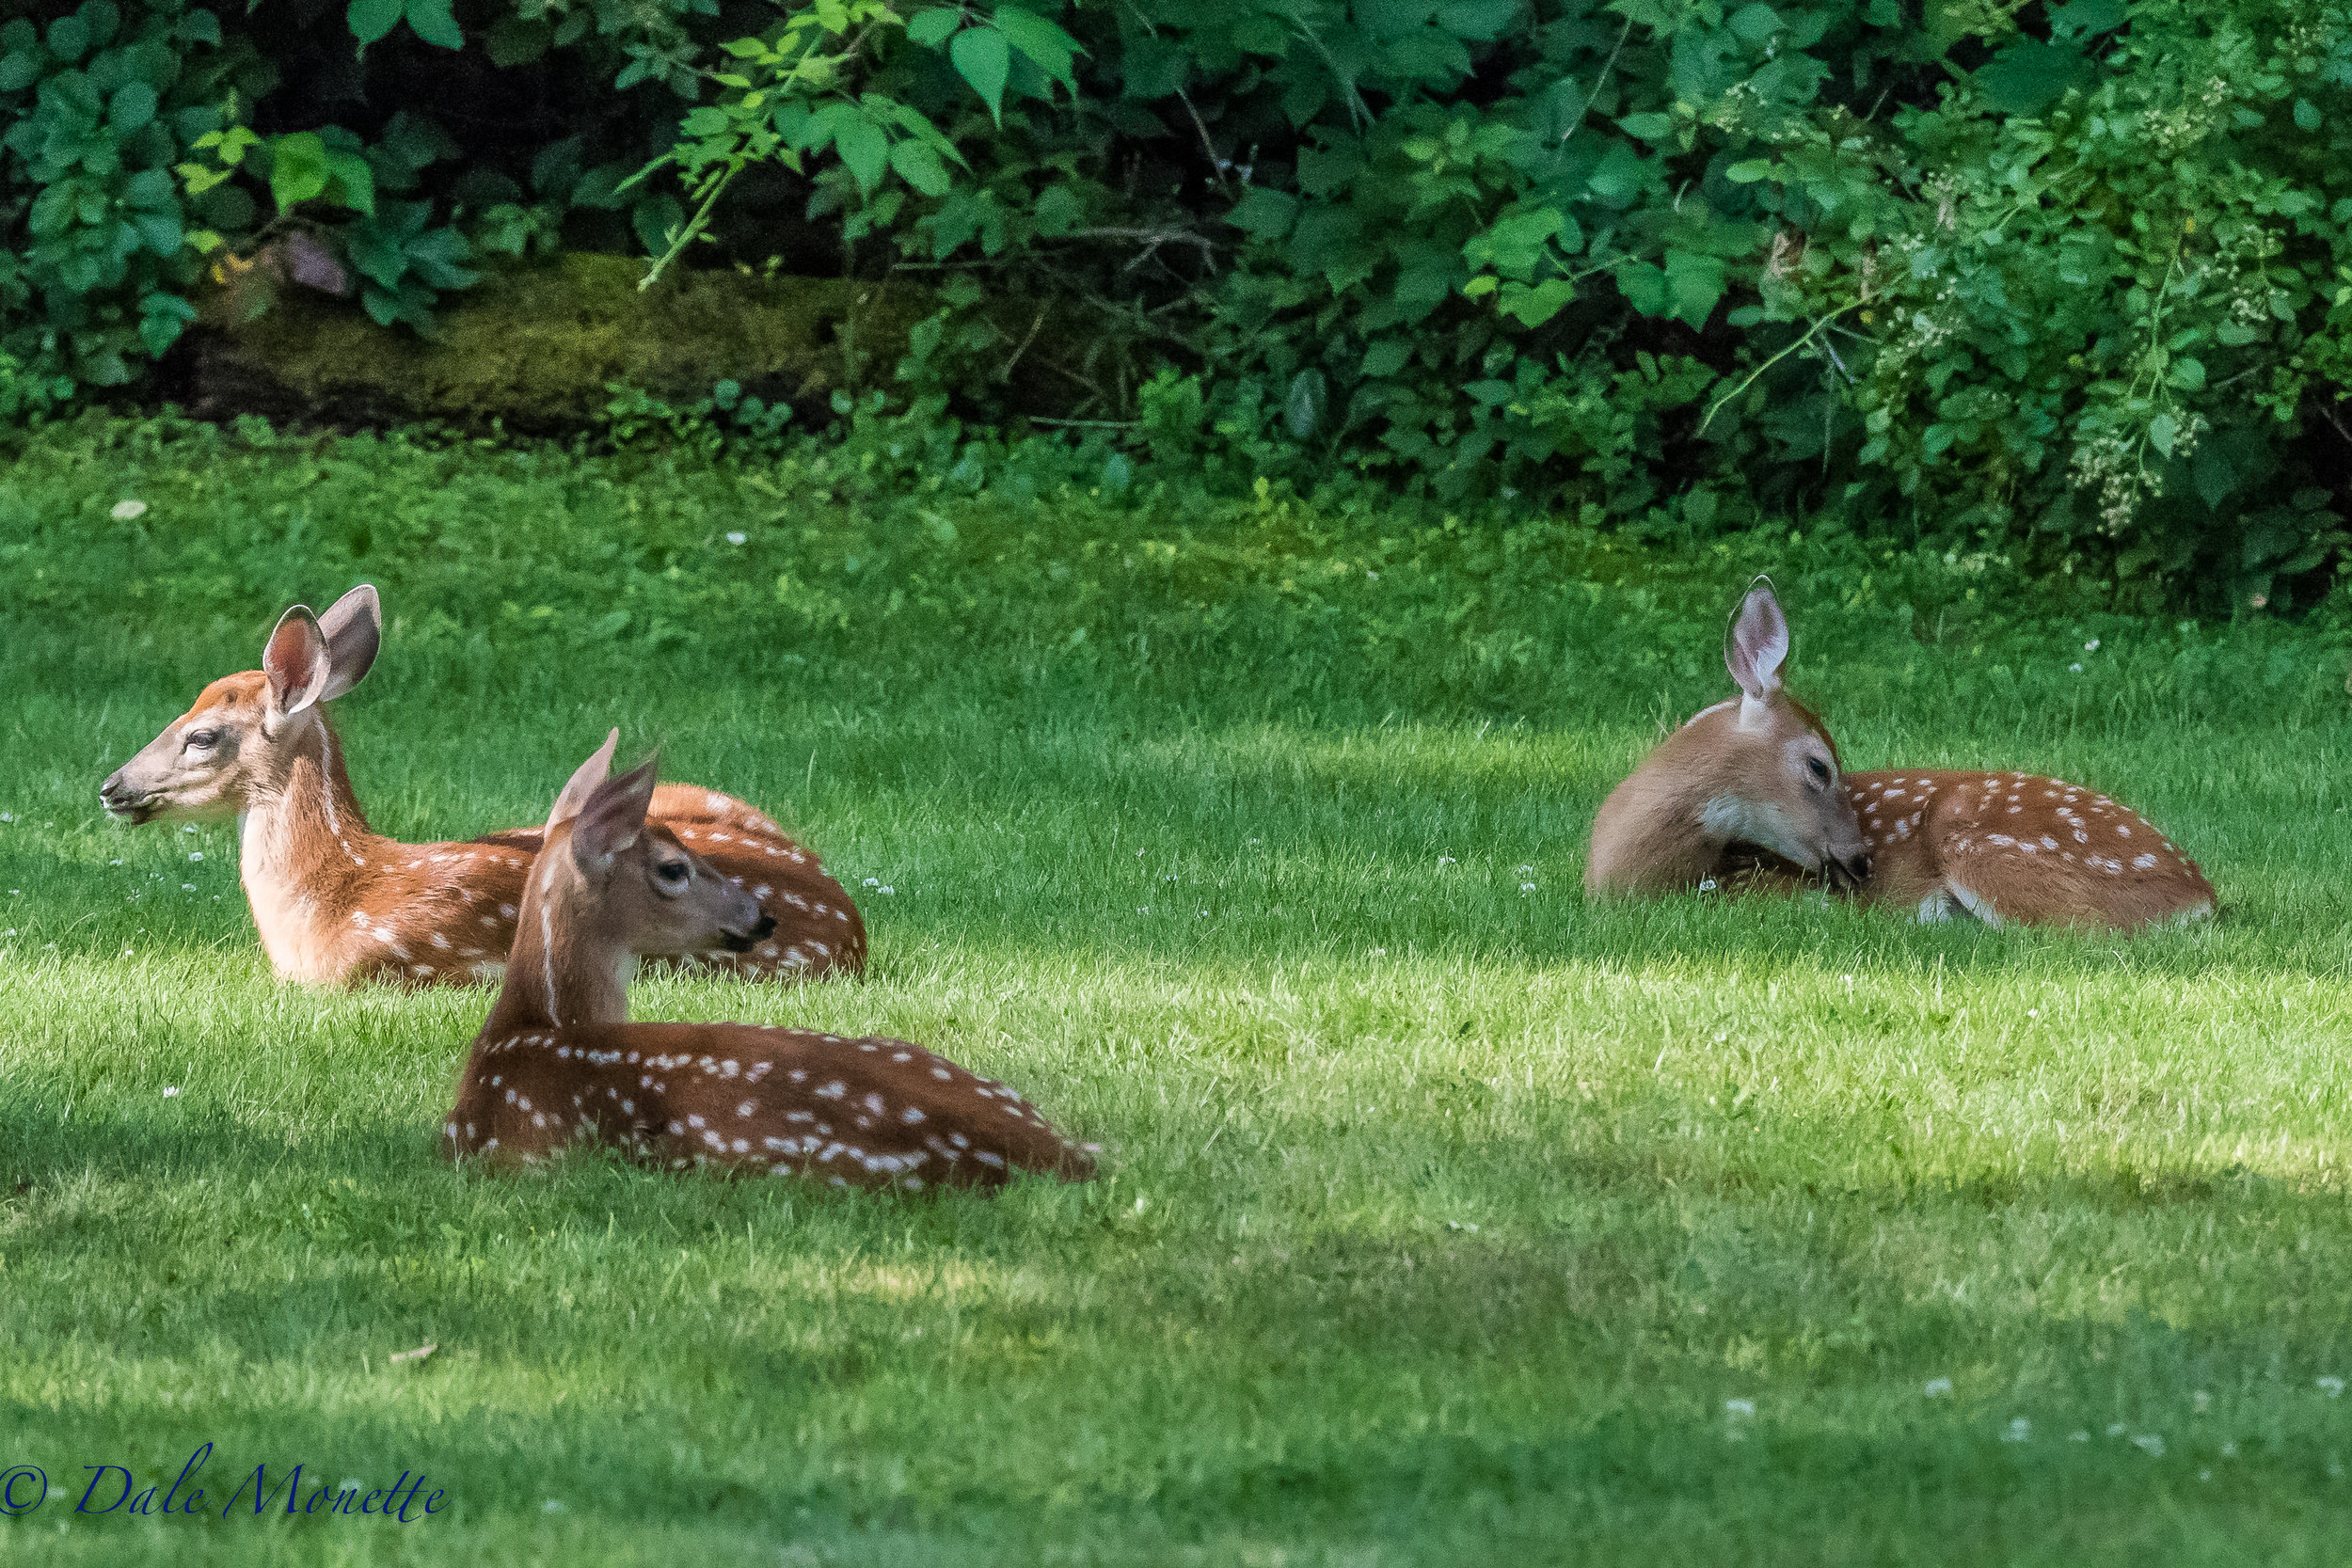   I spotted these 3 fawns all loafing in the sum this morning in a backyard in Athol. &nbsp;They were acting just like tame deer until a dog came down the road ! &nbsp;8/6/17  